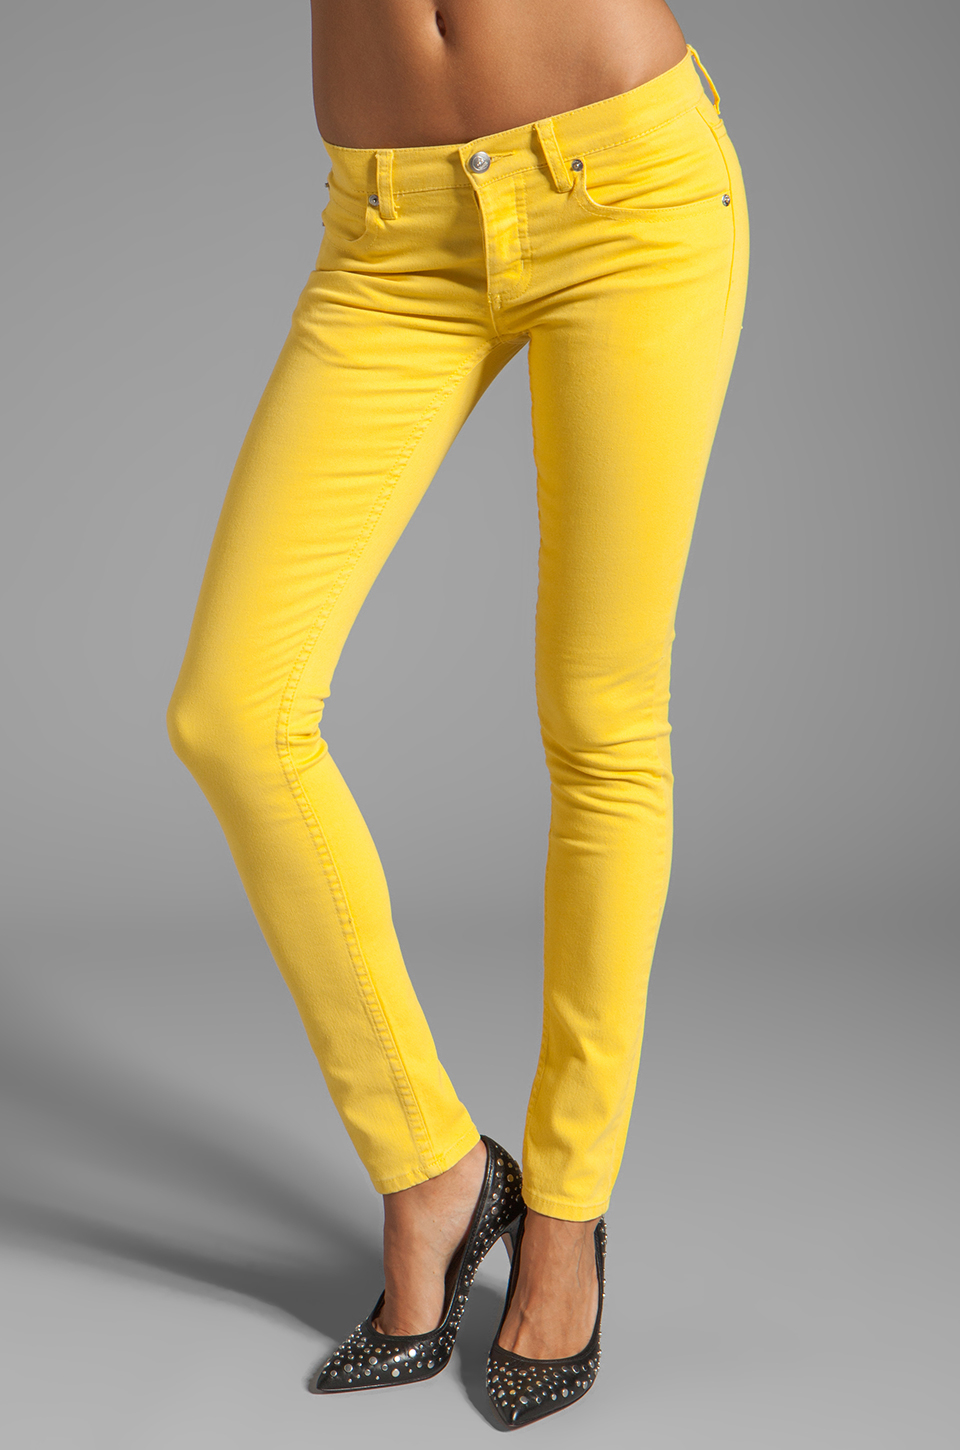 Cheap Monday Narrow Jeans in Bright Yellow | Lyst